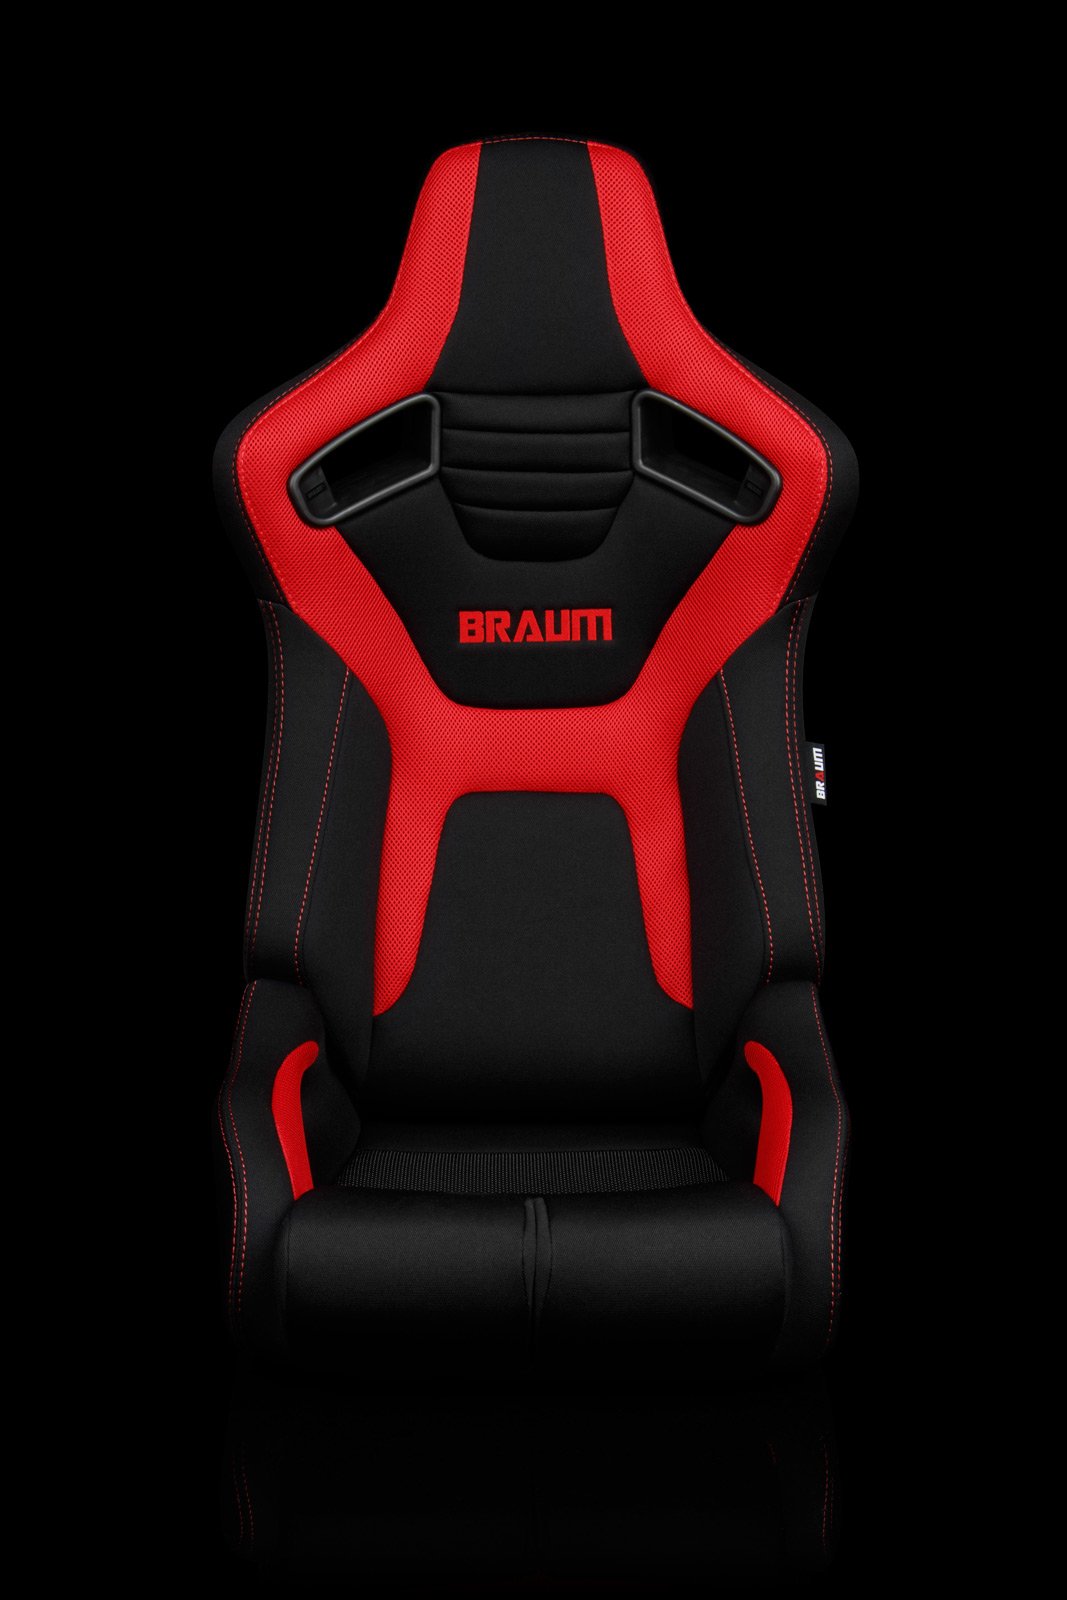 Braum Elite-R Series Sport Seats - Black & Red Polo Cloth/ Red Stitching (PAIR) - Lowered Lifestyle